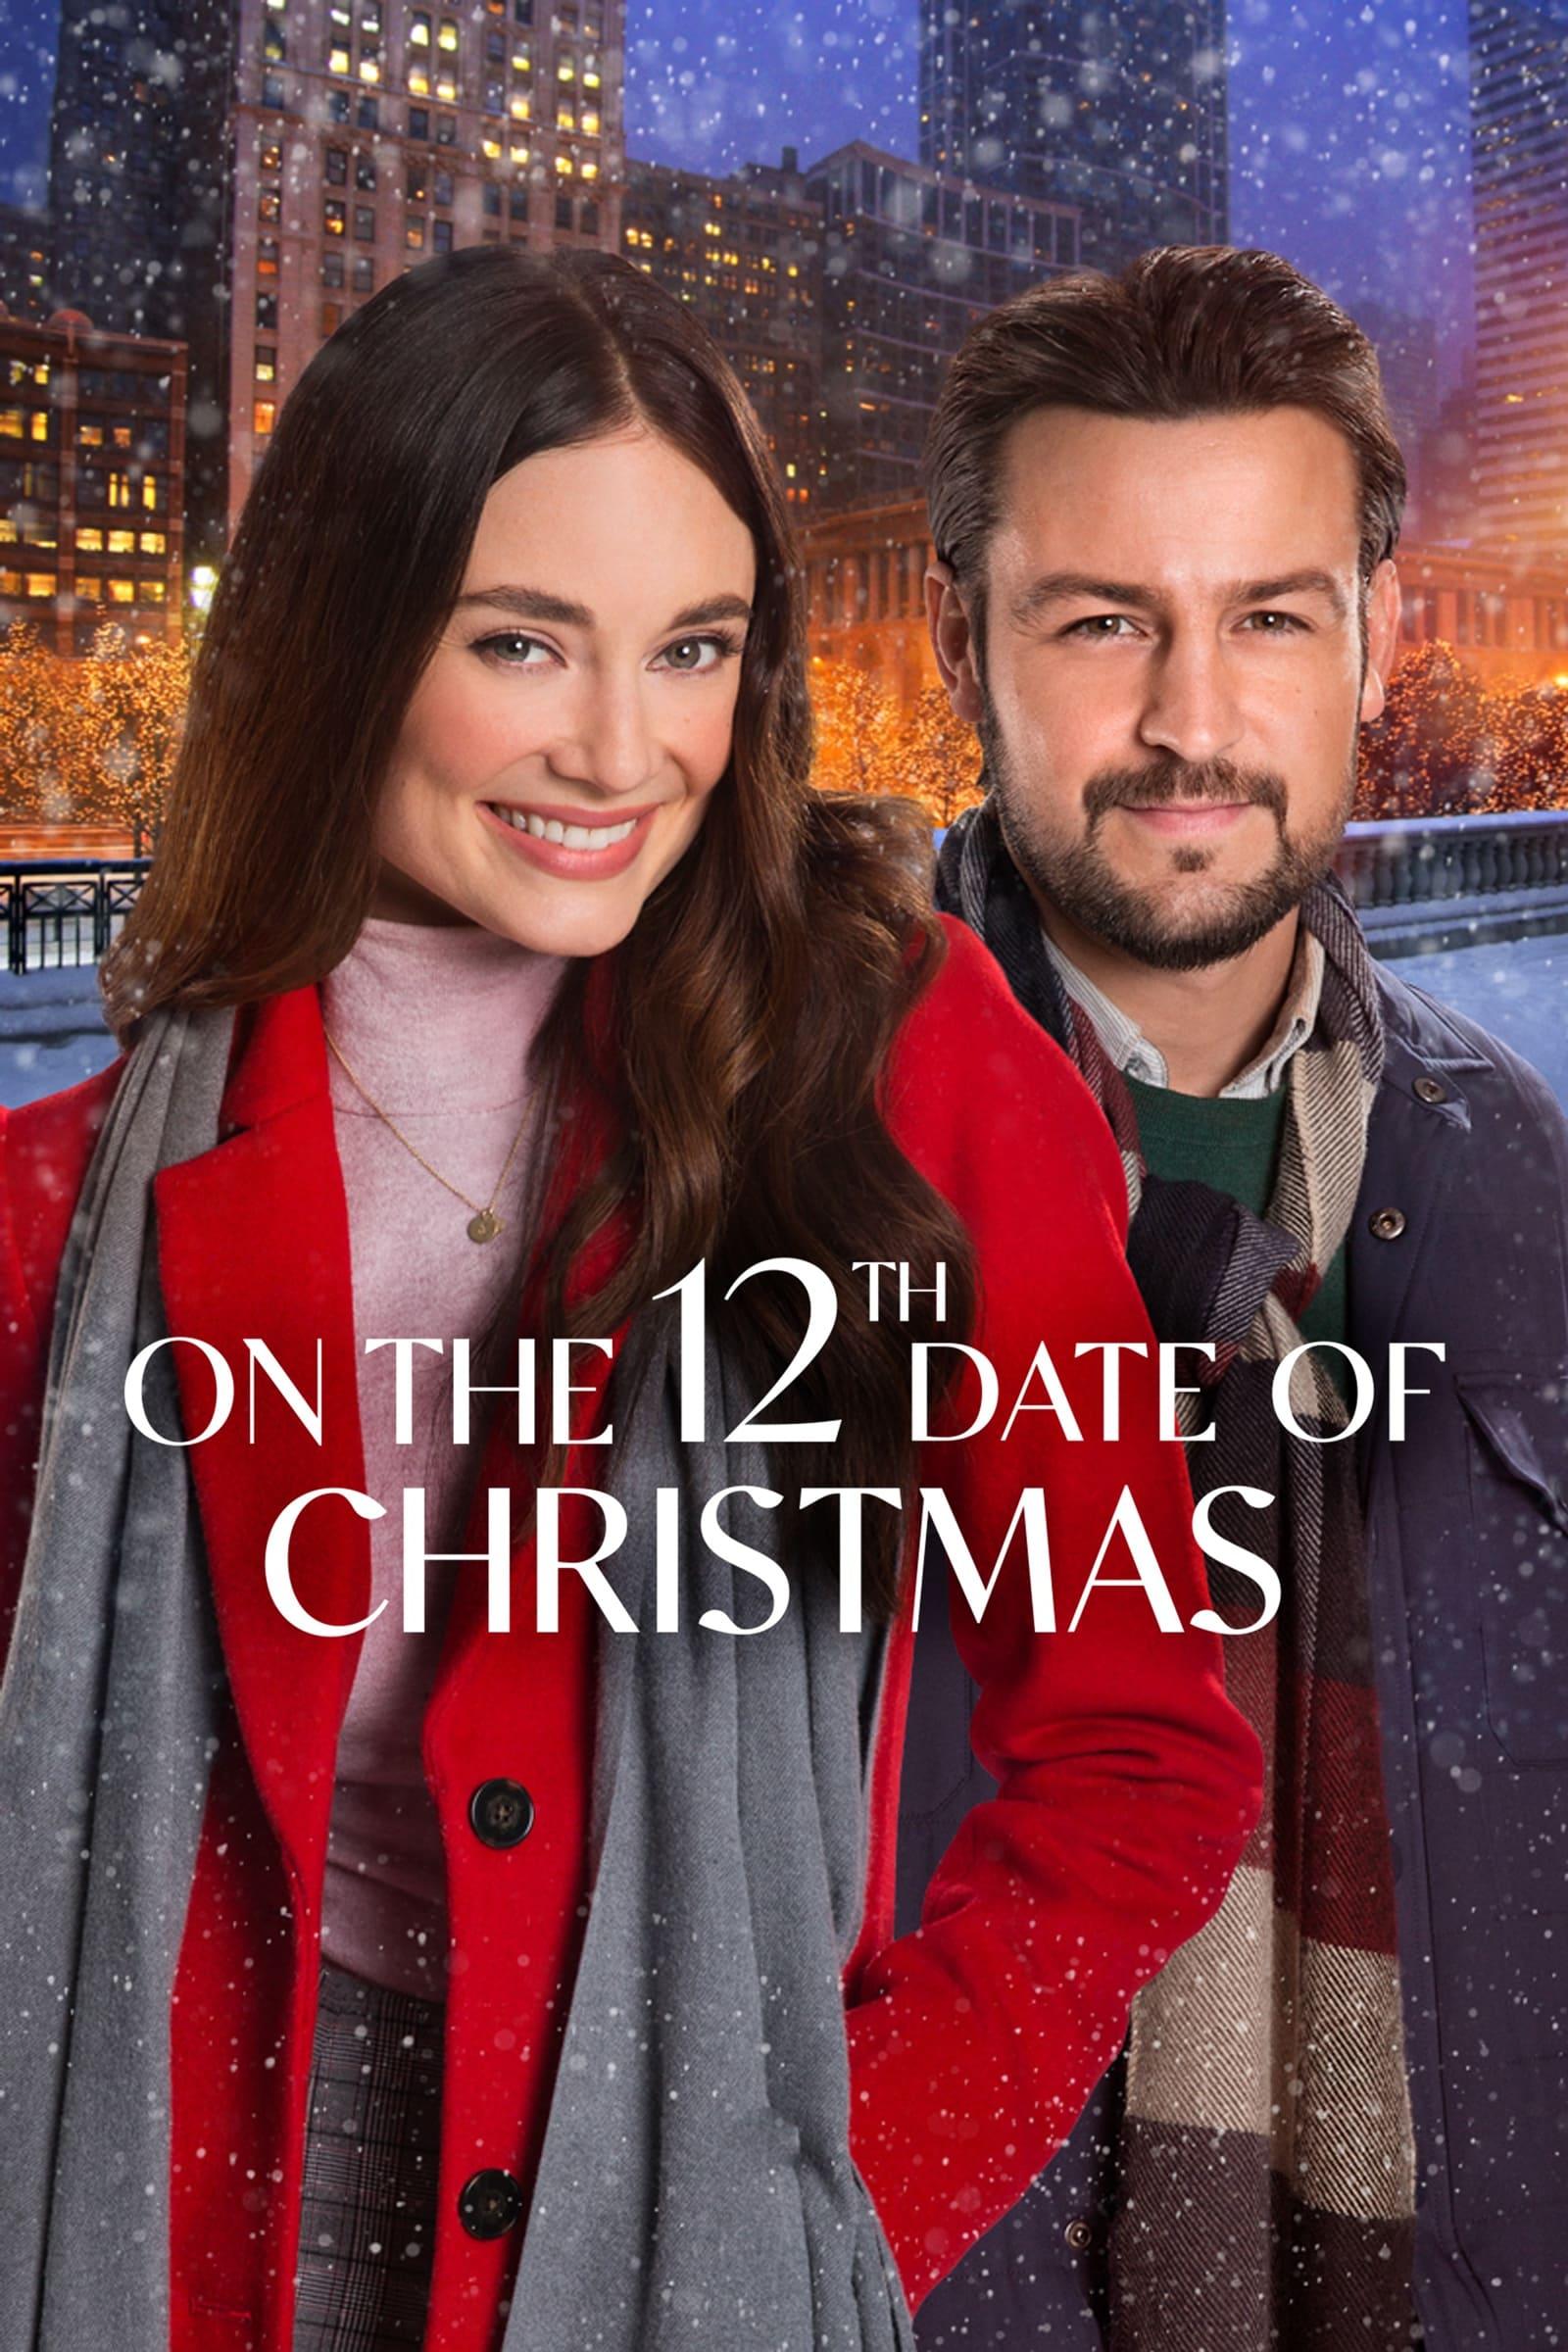 On the 12th Date of Christmas poster